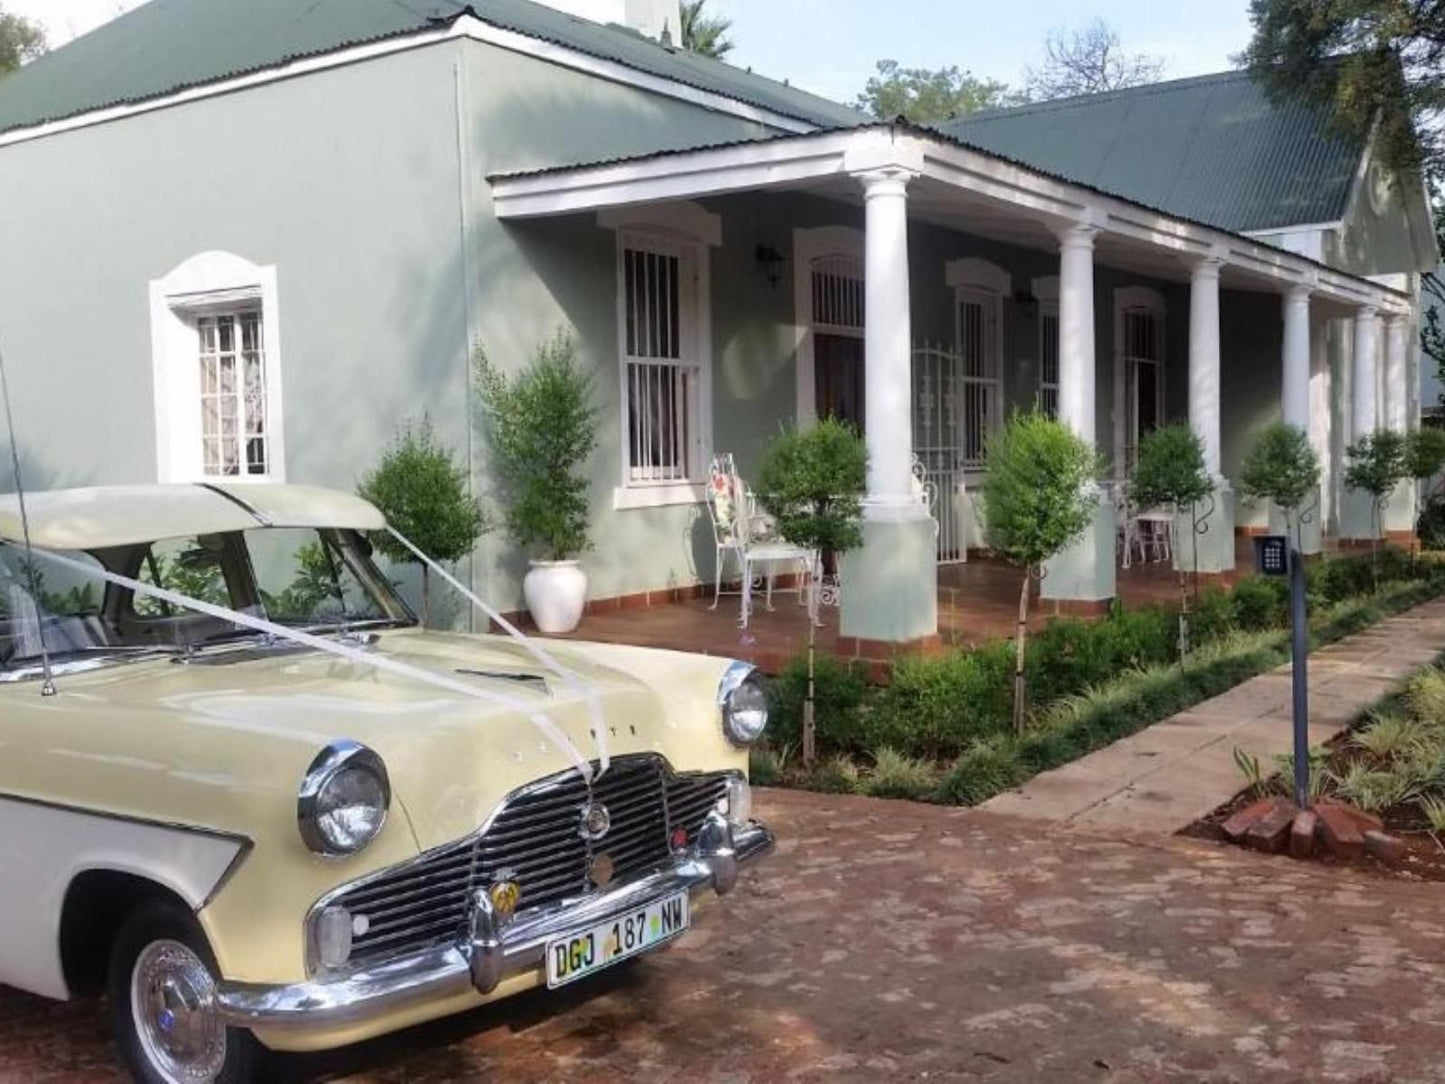 Bauhenia Guesthouse Potchefstroom North West Province South Africa House, Building, Architecture